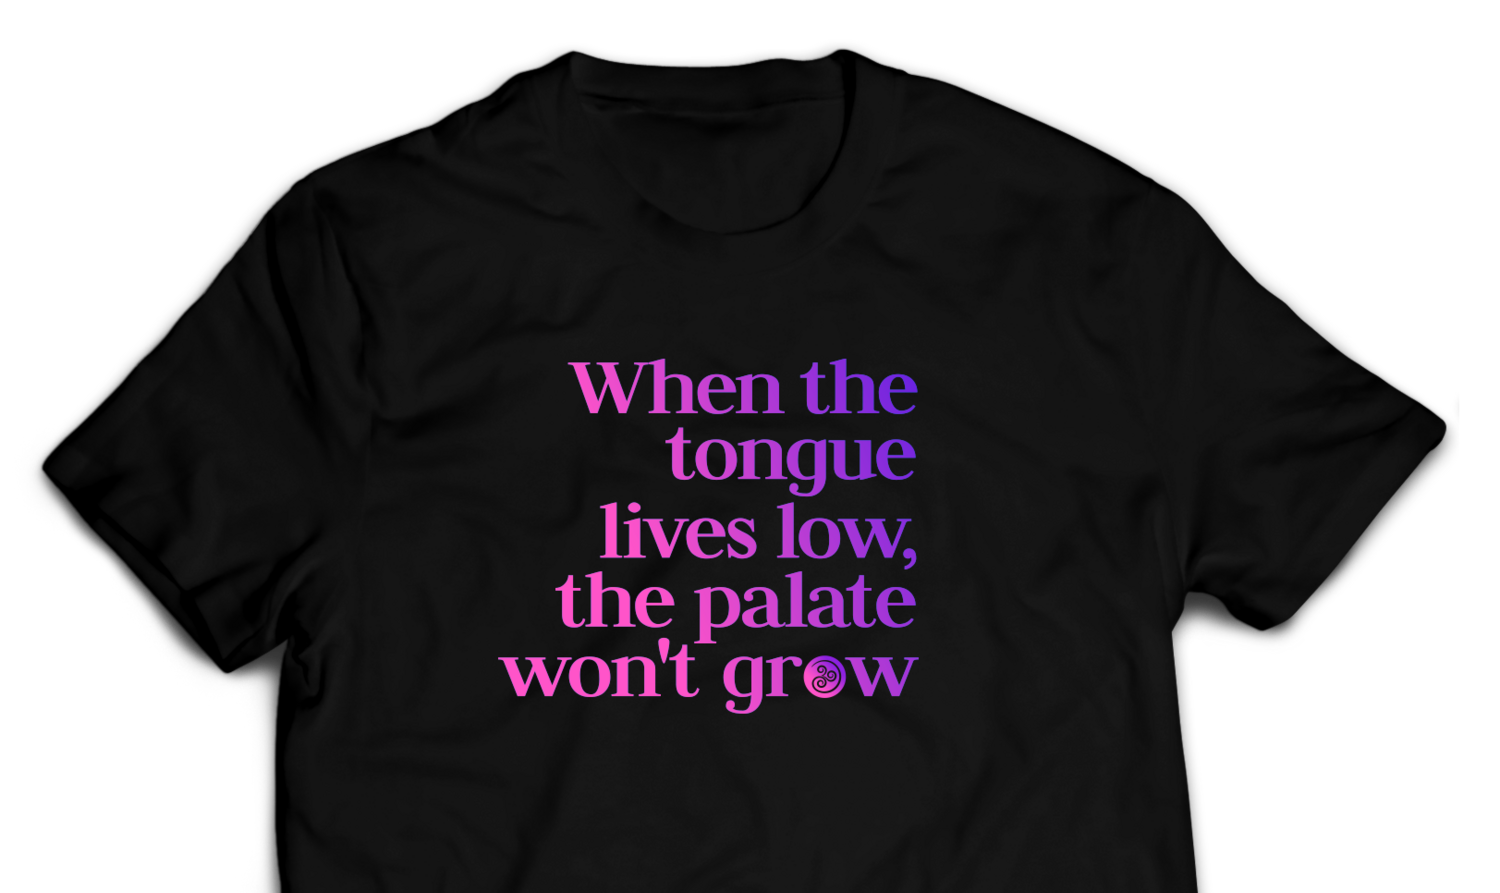 "When the tongue lives low, the palate won't grow" | T-Shirt